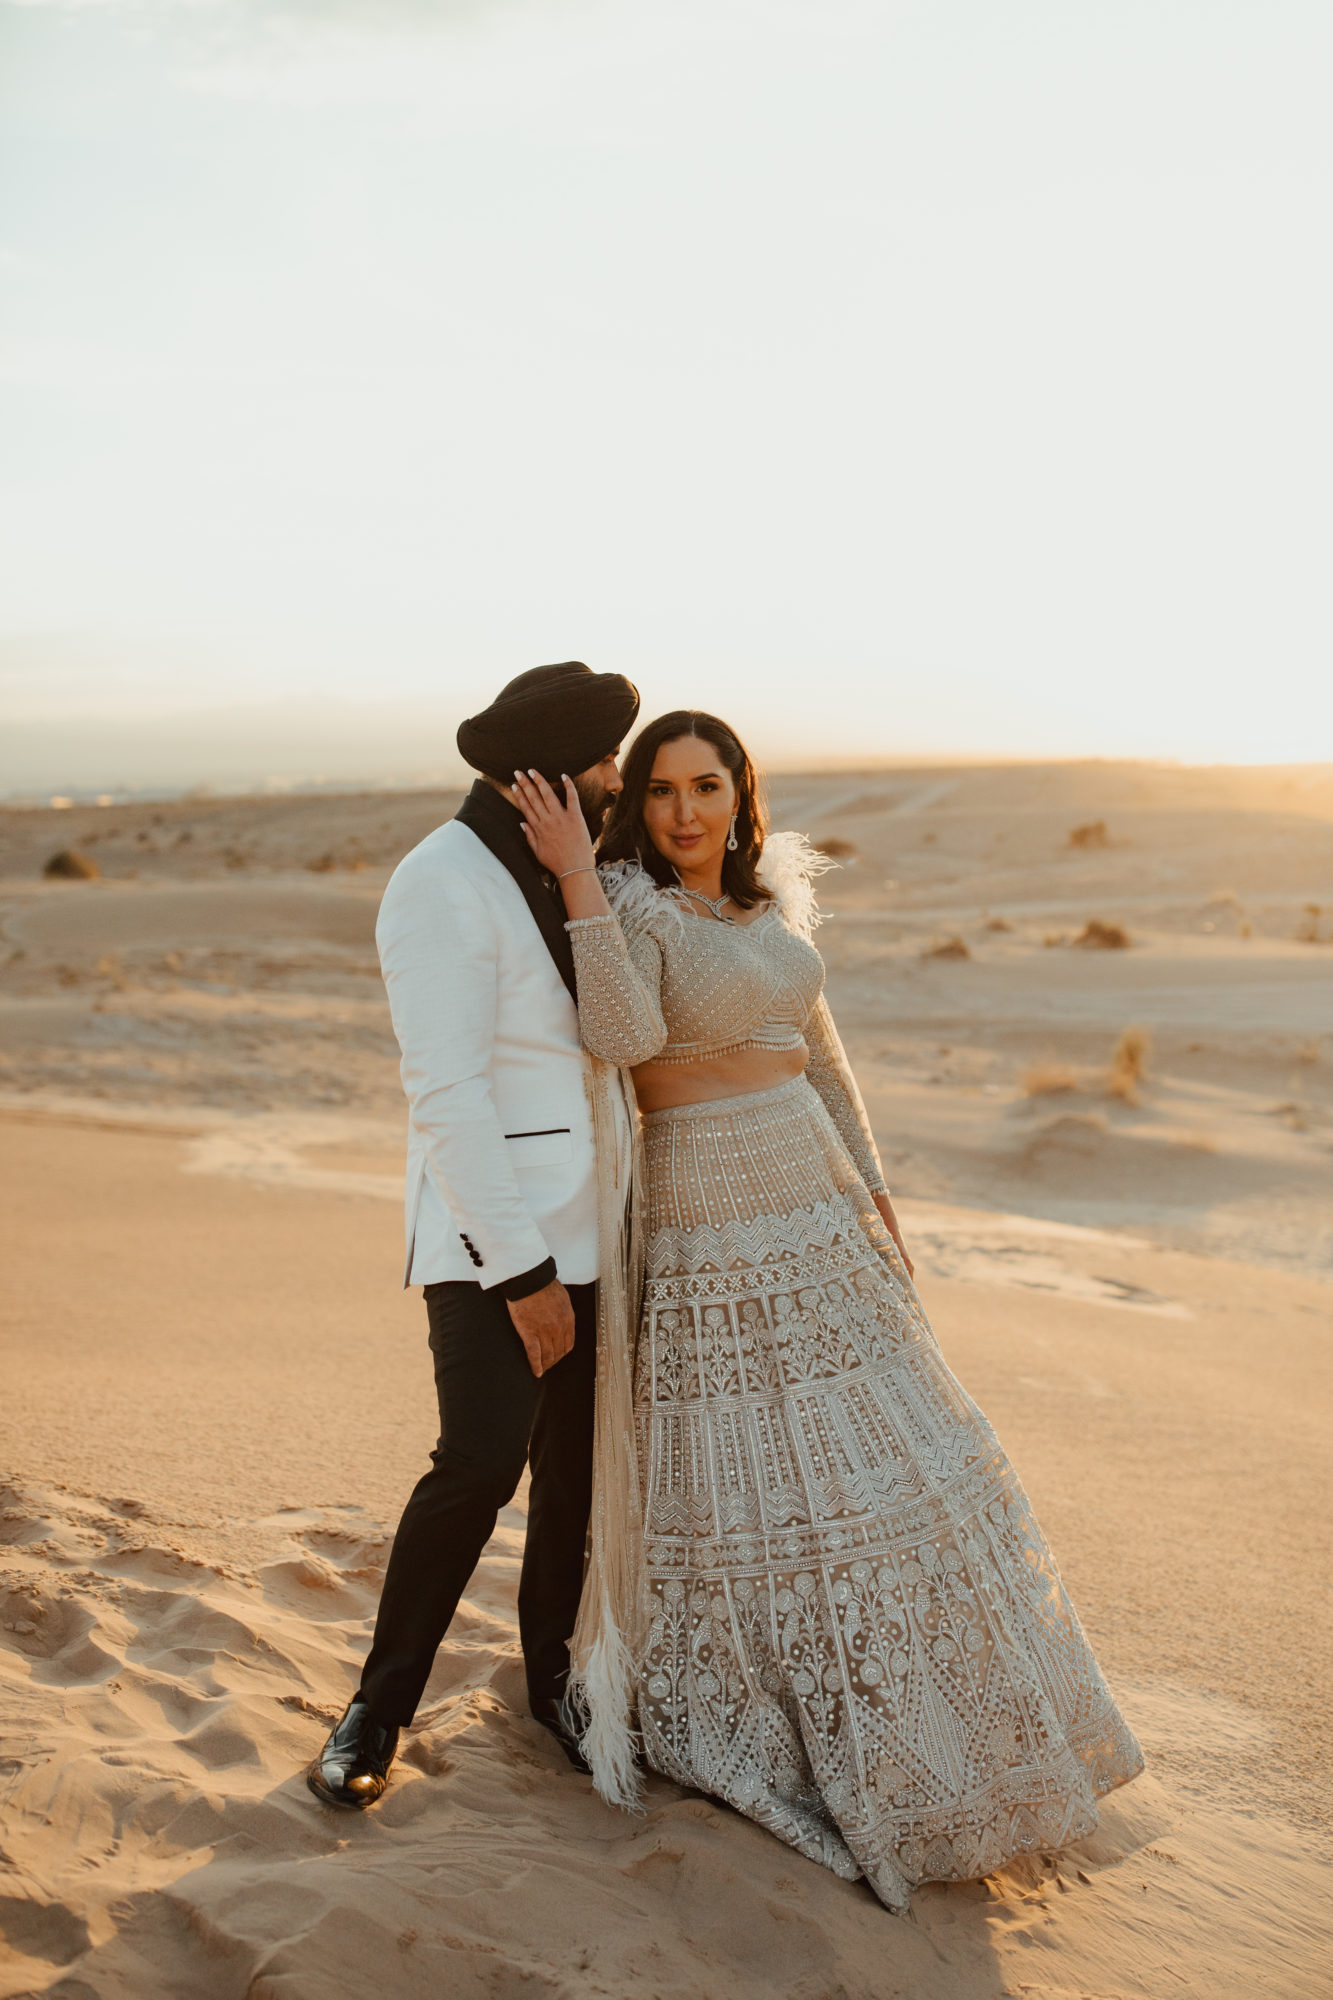 places to elope in nevada - the nellis sand dunes